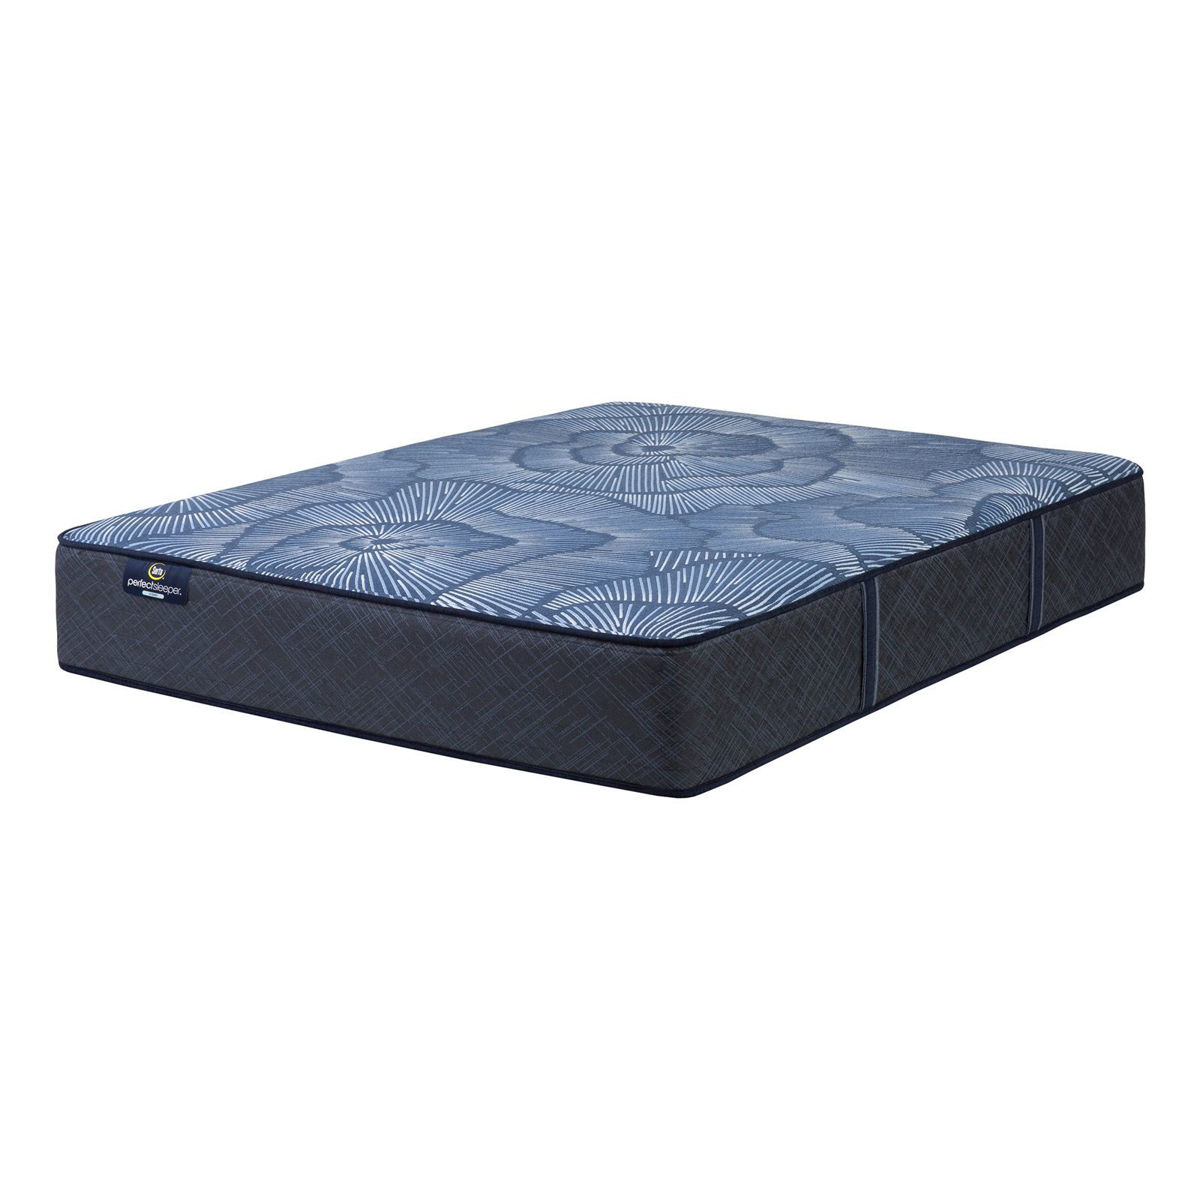 Picture of Queen Dream Sanctuary Firm Hybrid Mattress